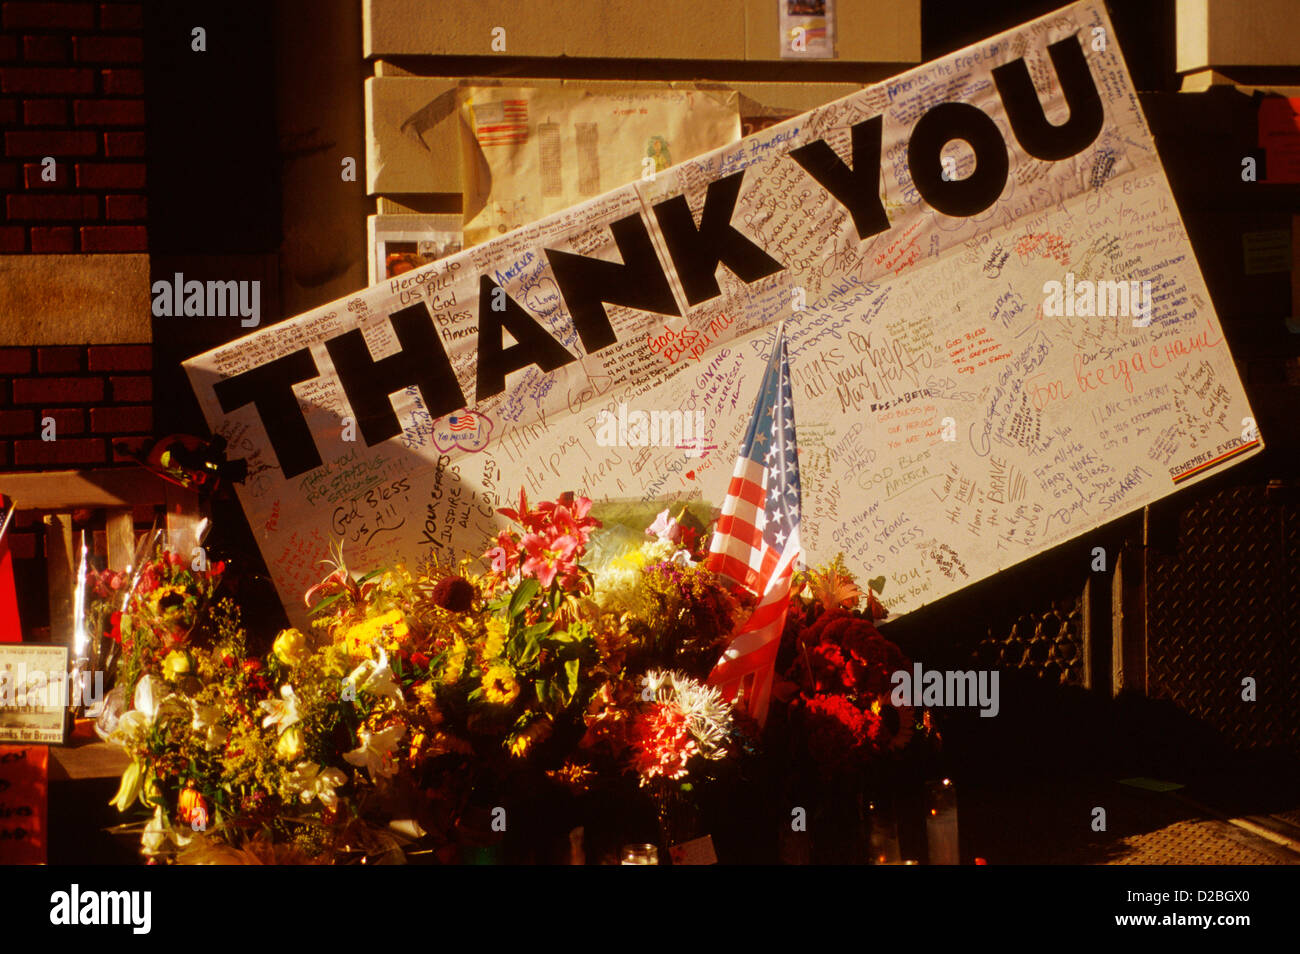 New York City, 9/11/2001. Memorial Thanking Firefighters Following World Trade Center Attack. Stock Photo